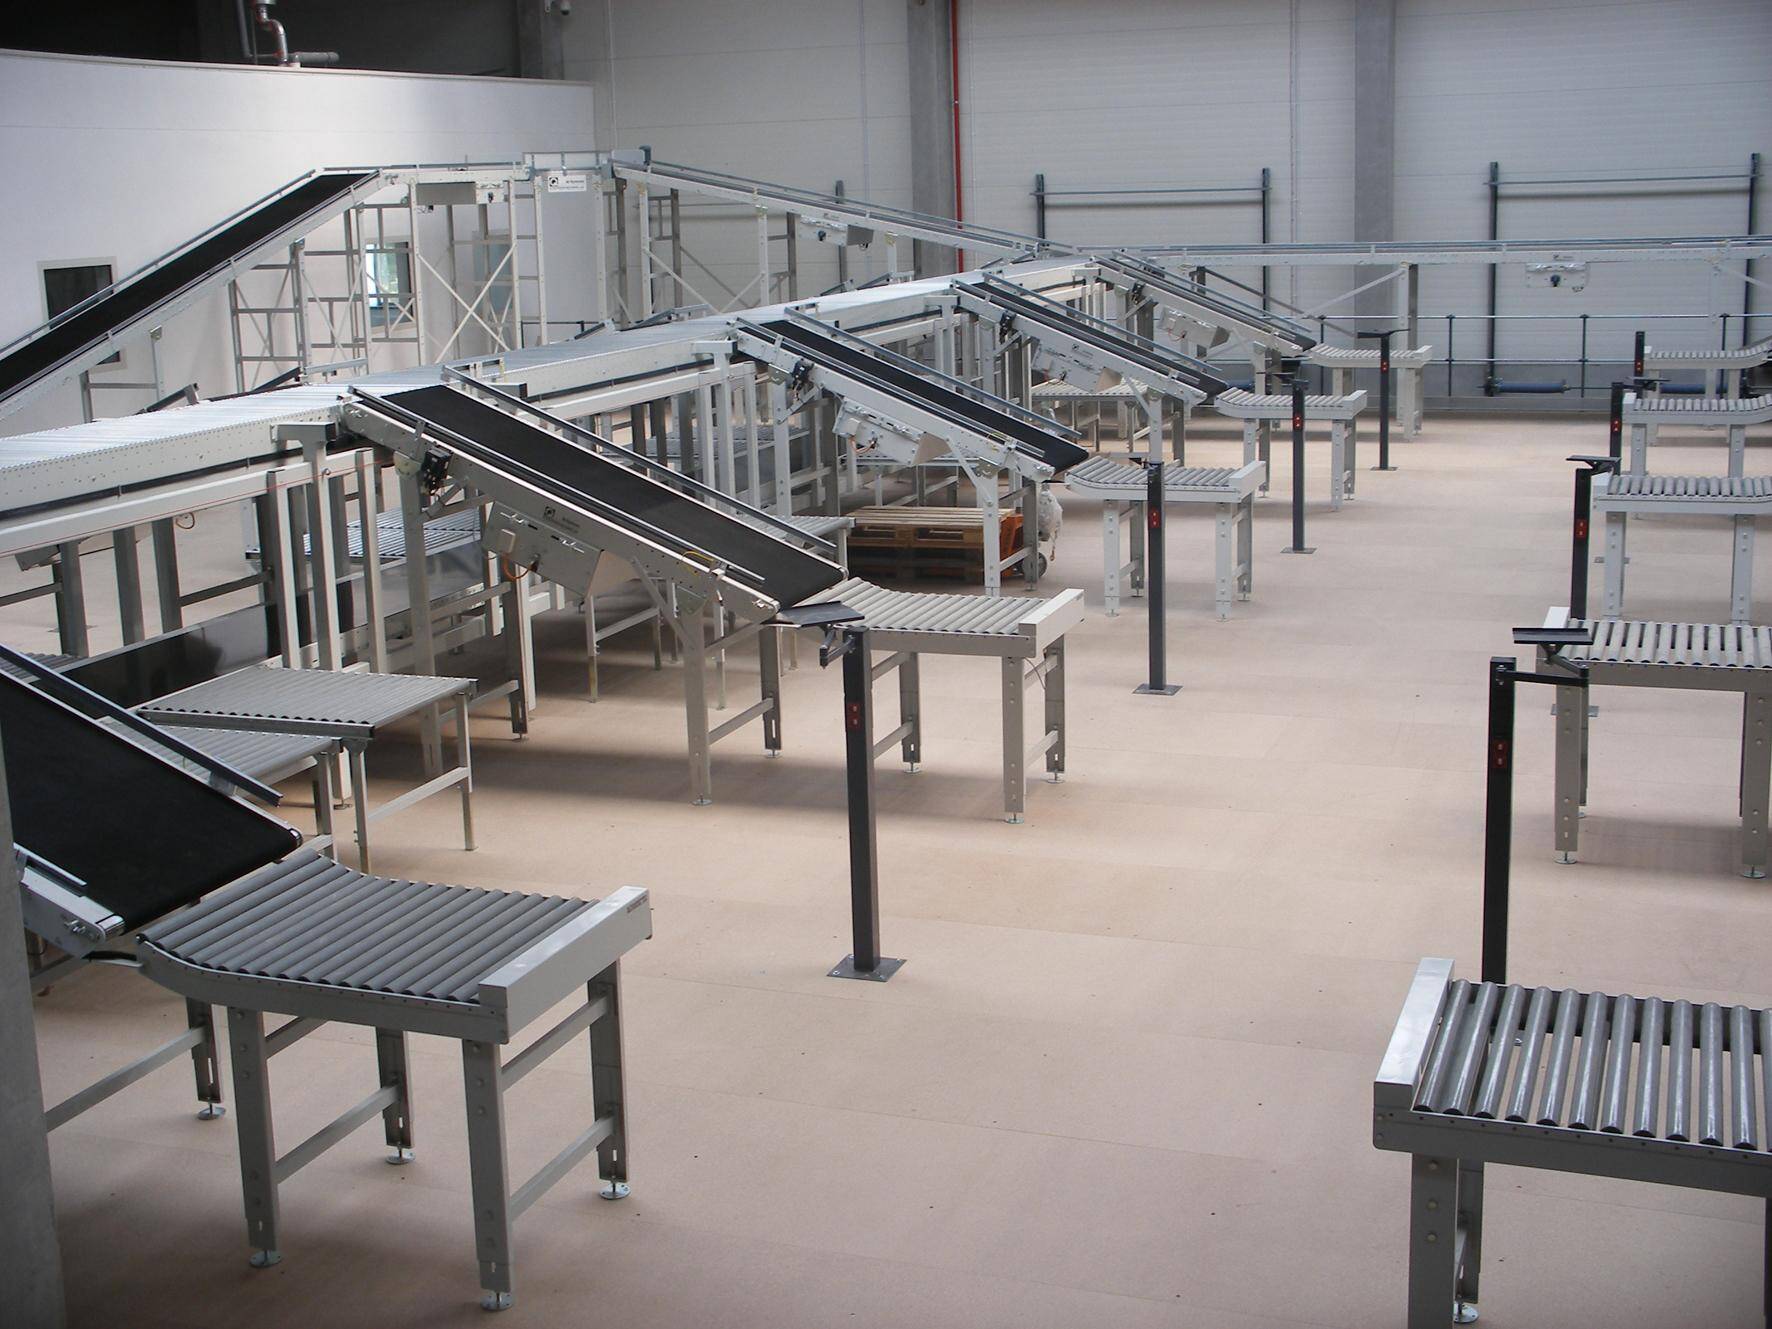 , Prime Cargo &#8211; The Conveyor System Is the Heart of Prime Cargo’s  New 3PL Warehouse